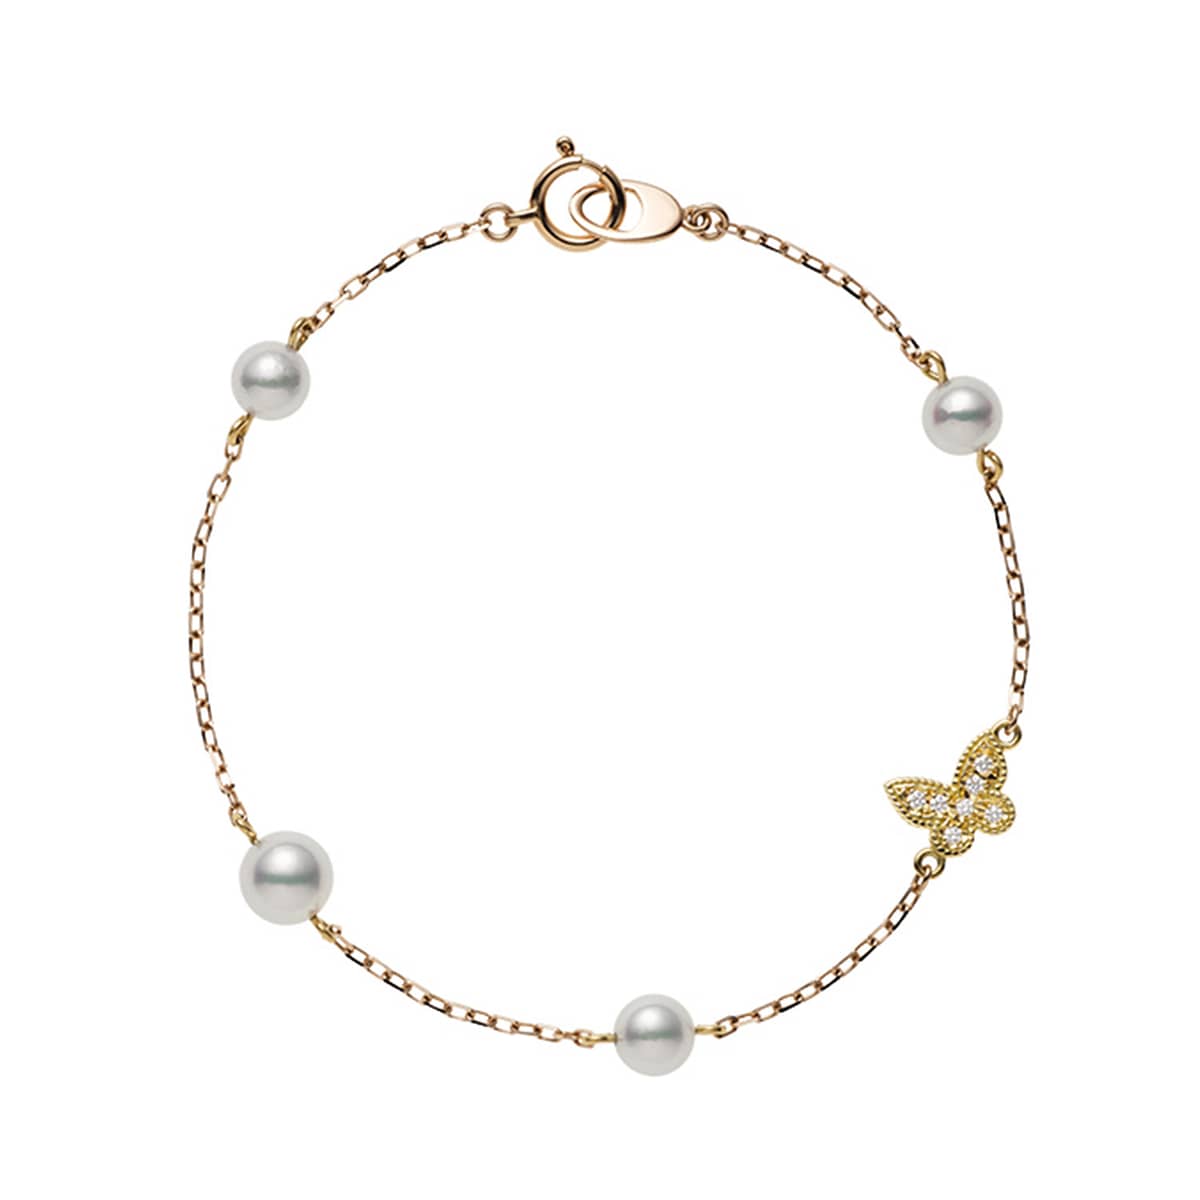 Mikimoto 18k Rose Gold Pearl and Diamond Butterfly Bracelet. Simple, elegant and feminine: this bracelet is set with Akoya Cultured pearls and on an 18k rose gold strand bracelet, complete with a diamond set butterfly charm. Bracelet length 17cm, diamond carat weight 0.03ct, pearl size 5.5 - 4.5mm.